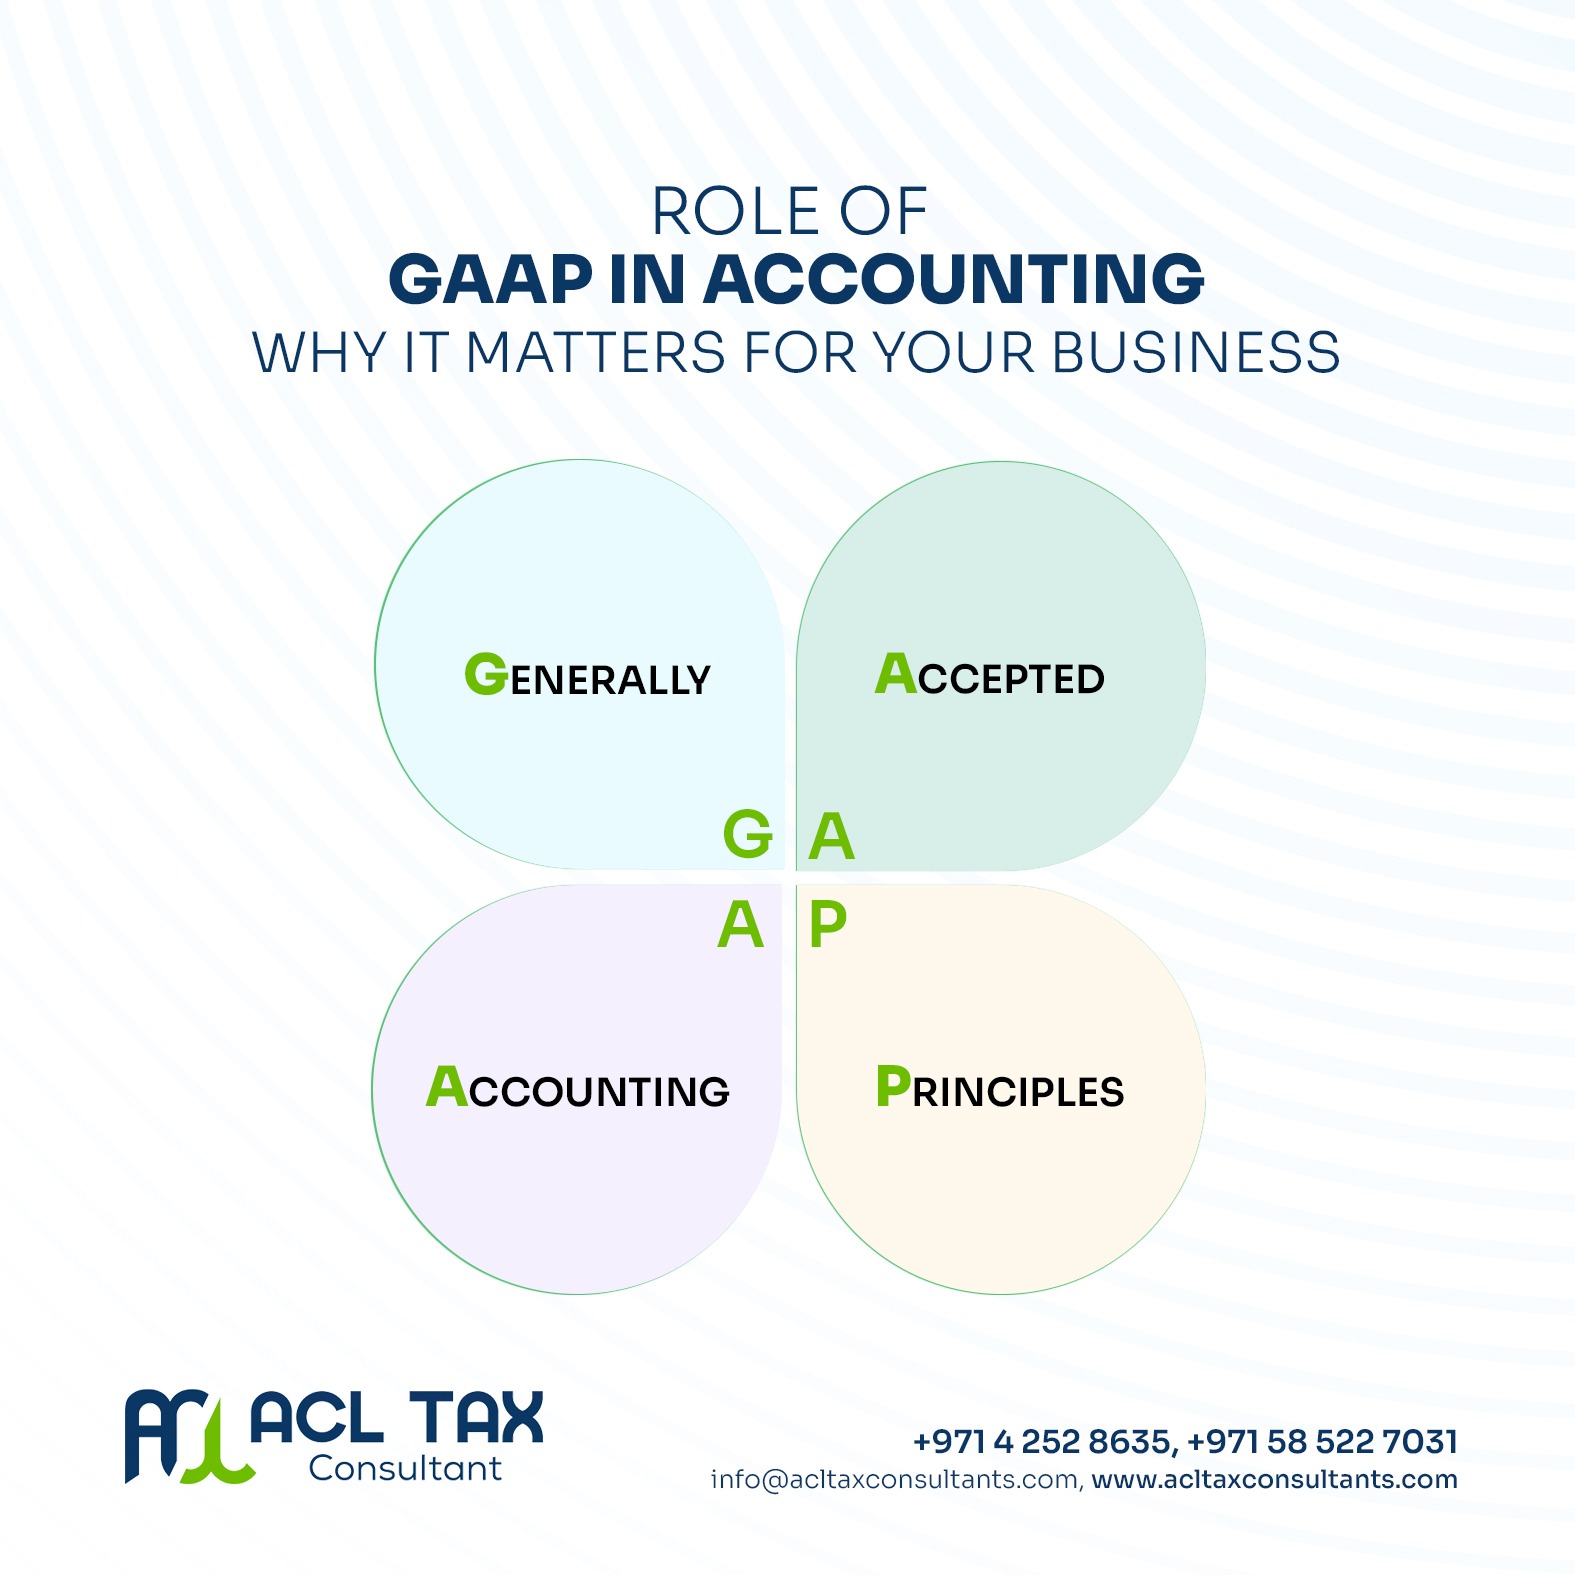 Accounting & Bookkeeping Services in Dubai